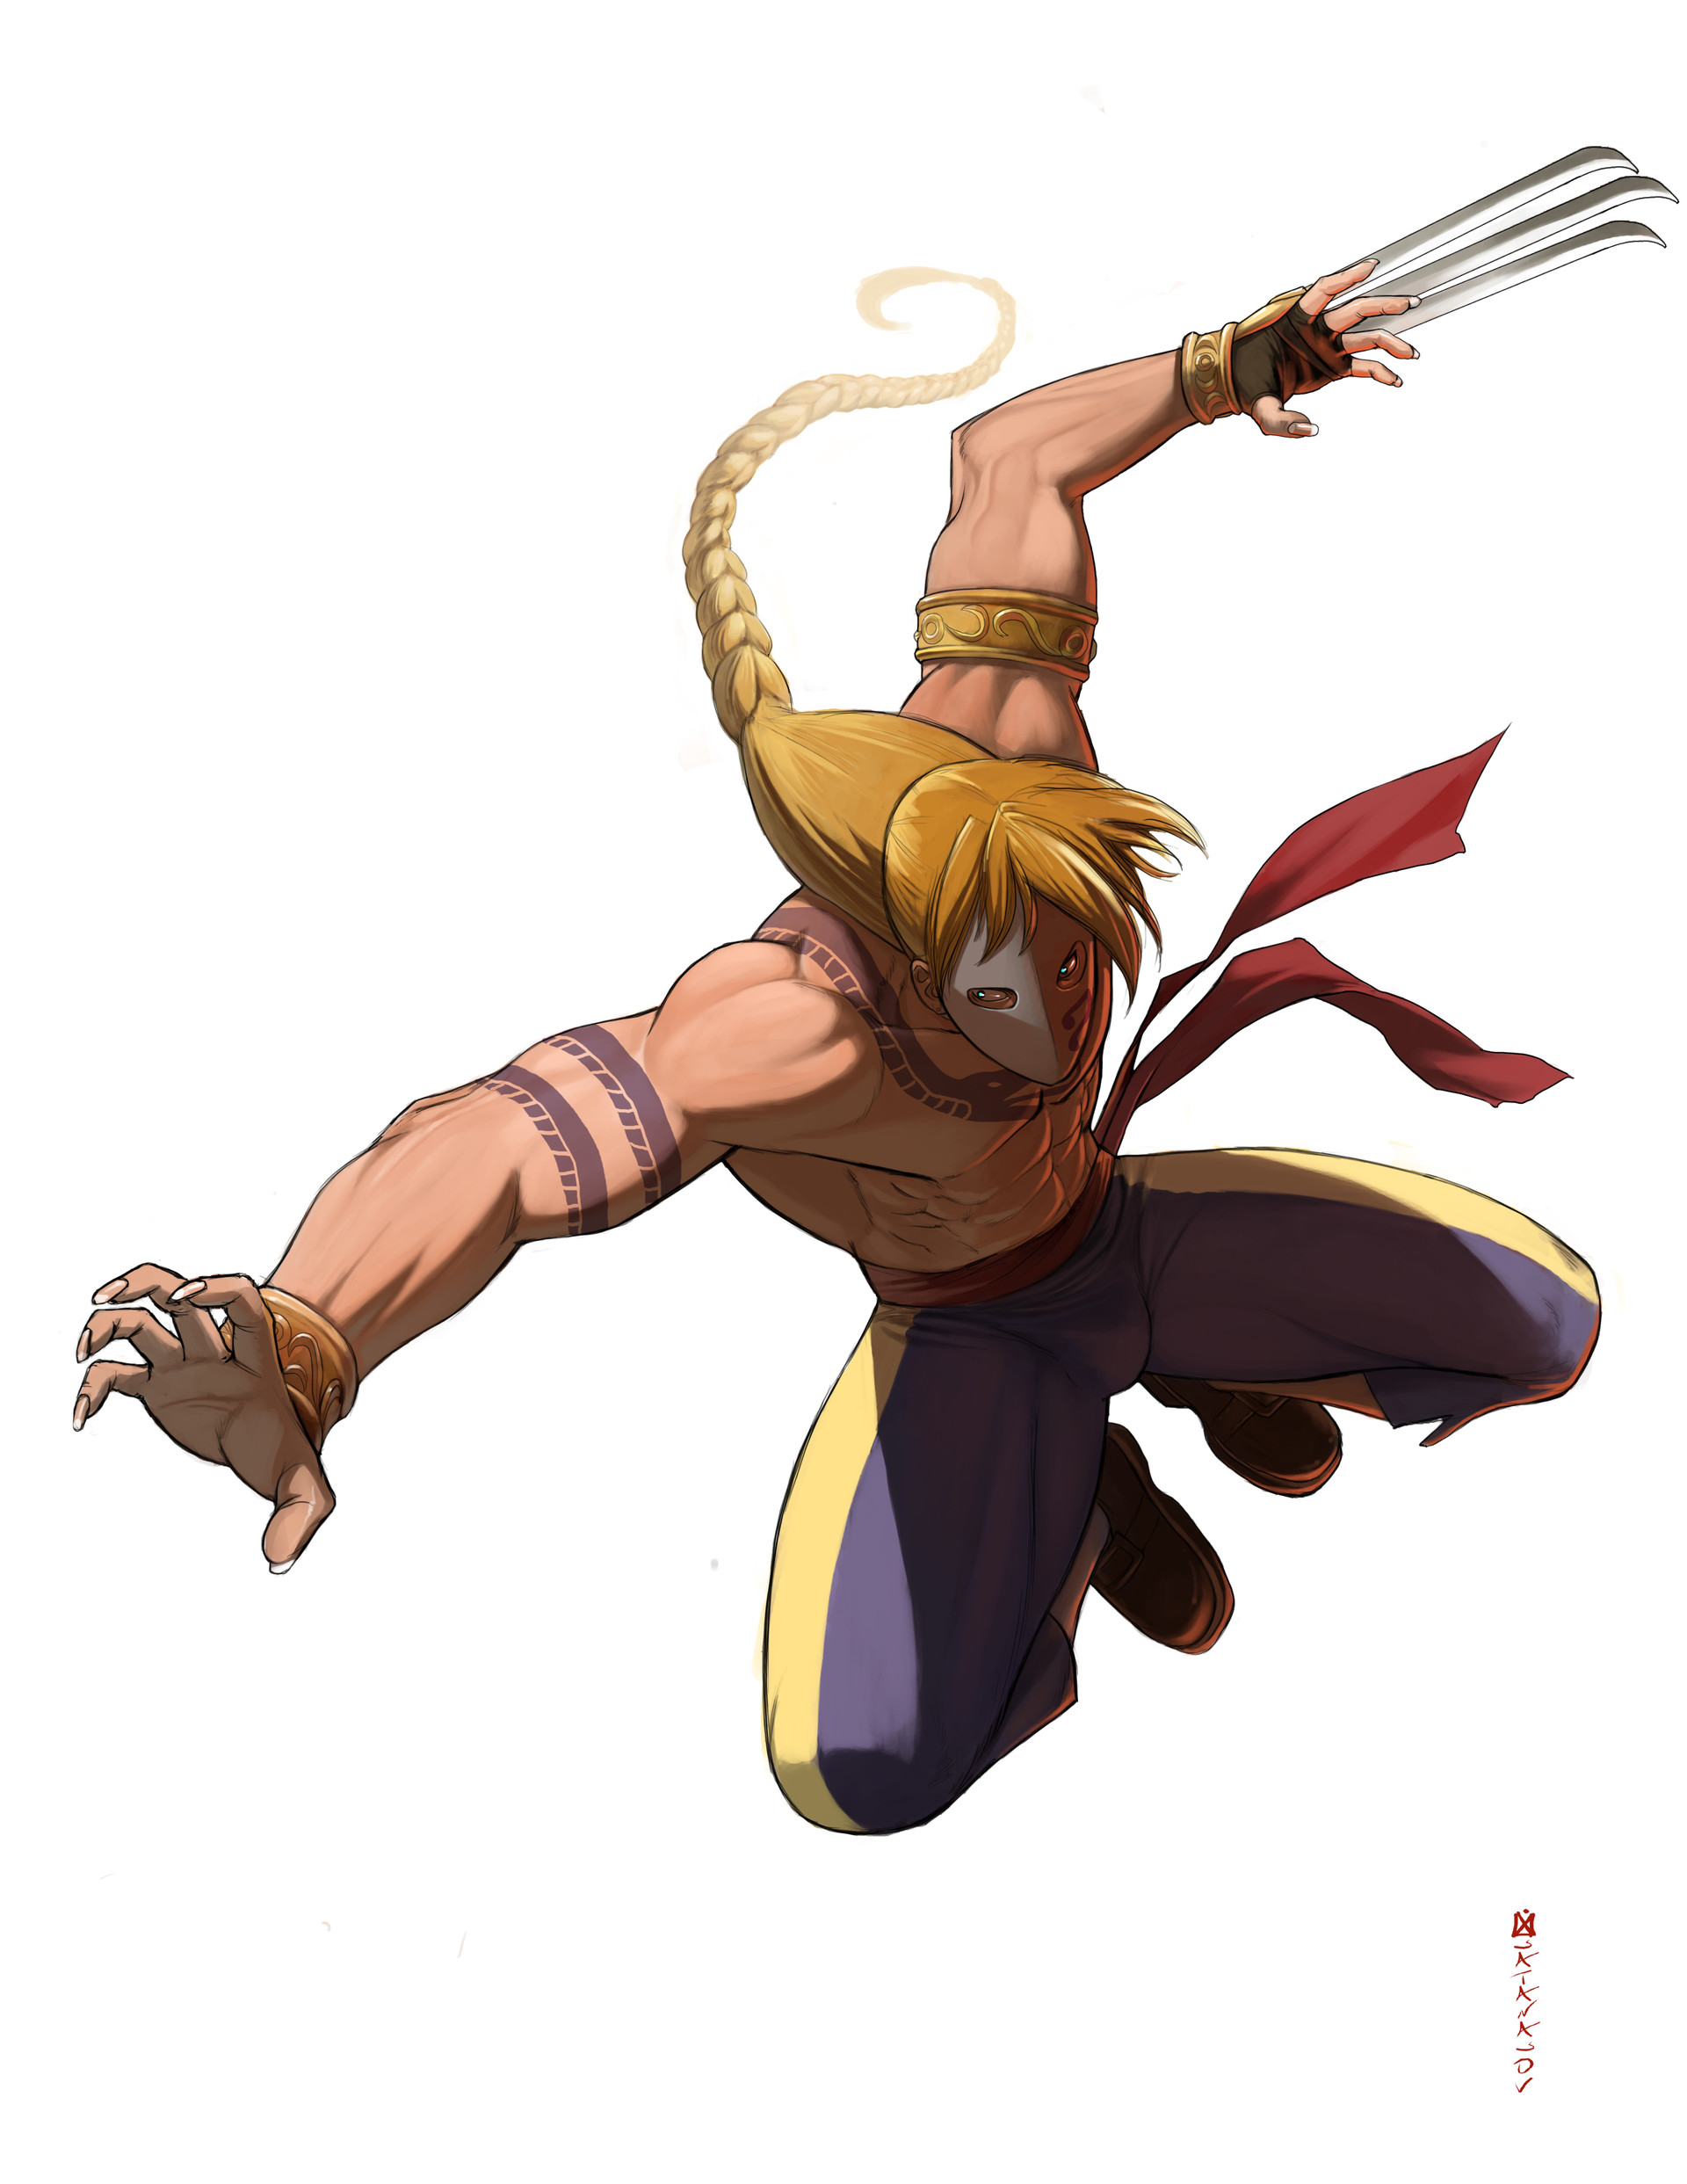 Vega (Street Fighter) – Time to collect